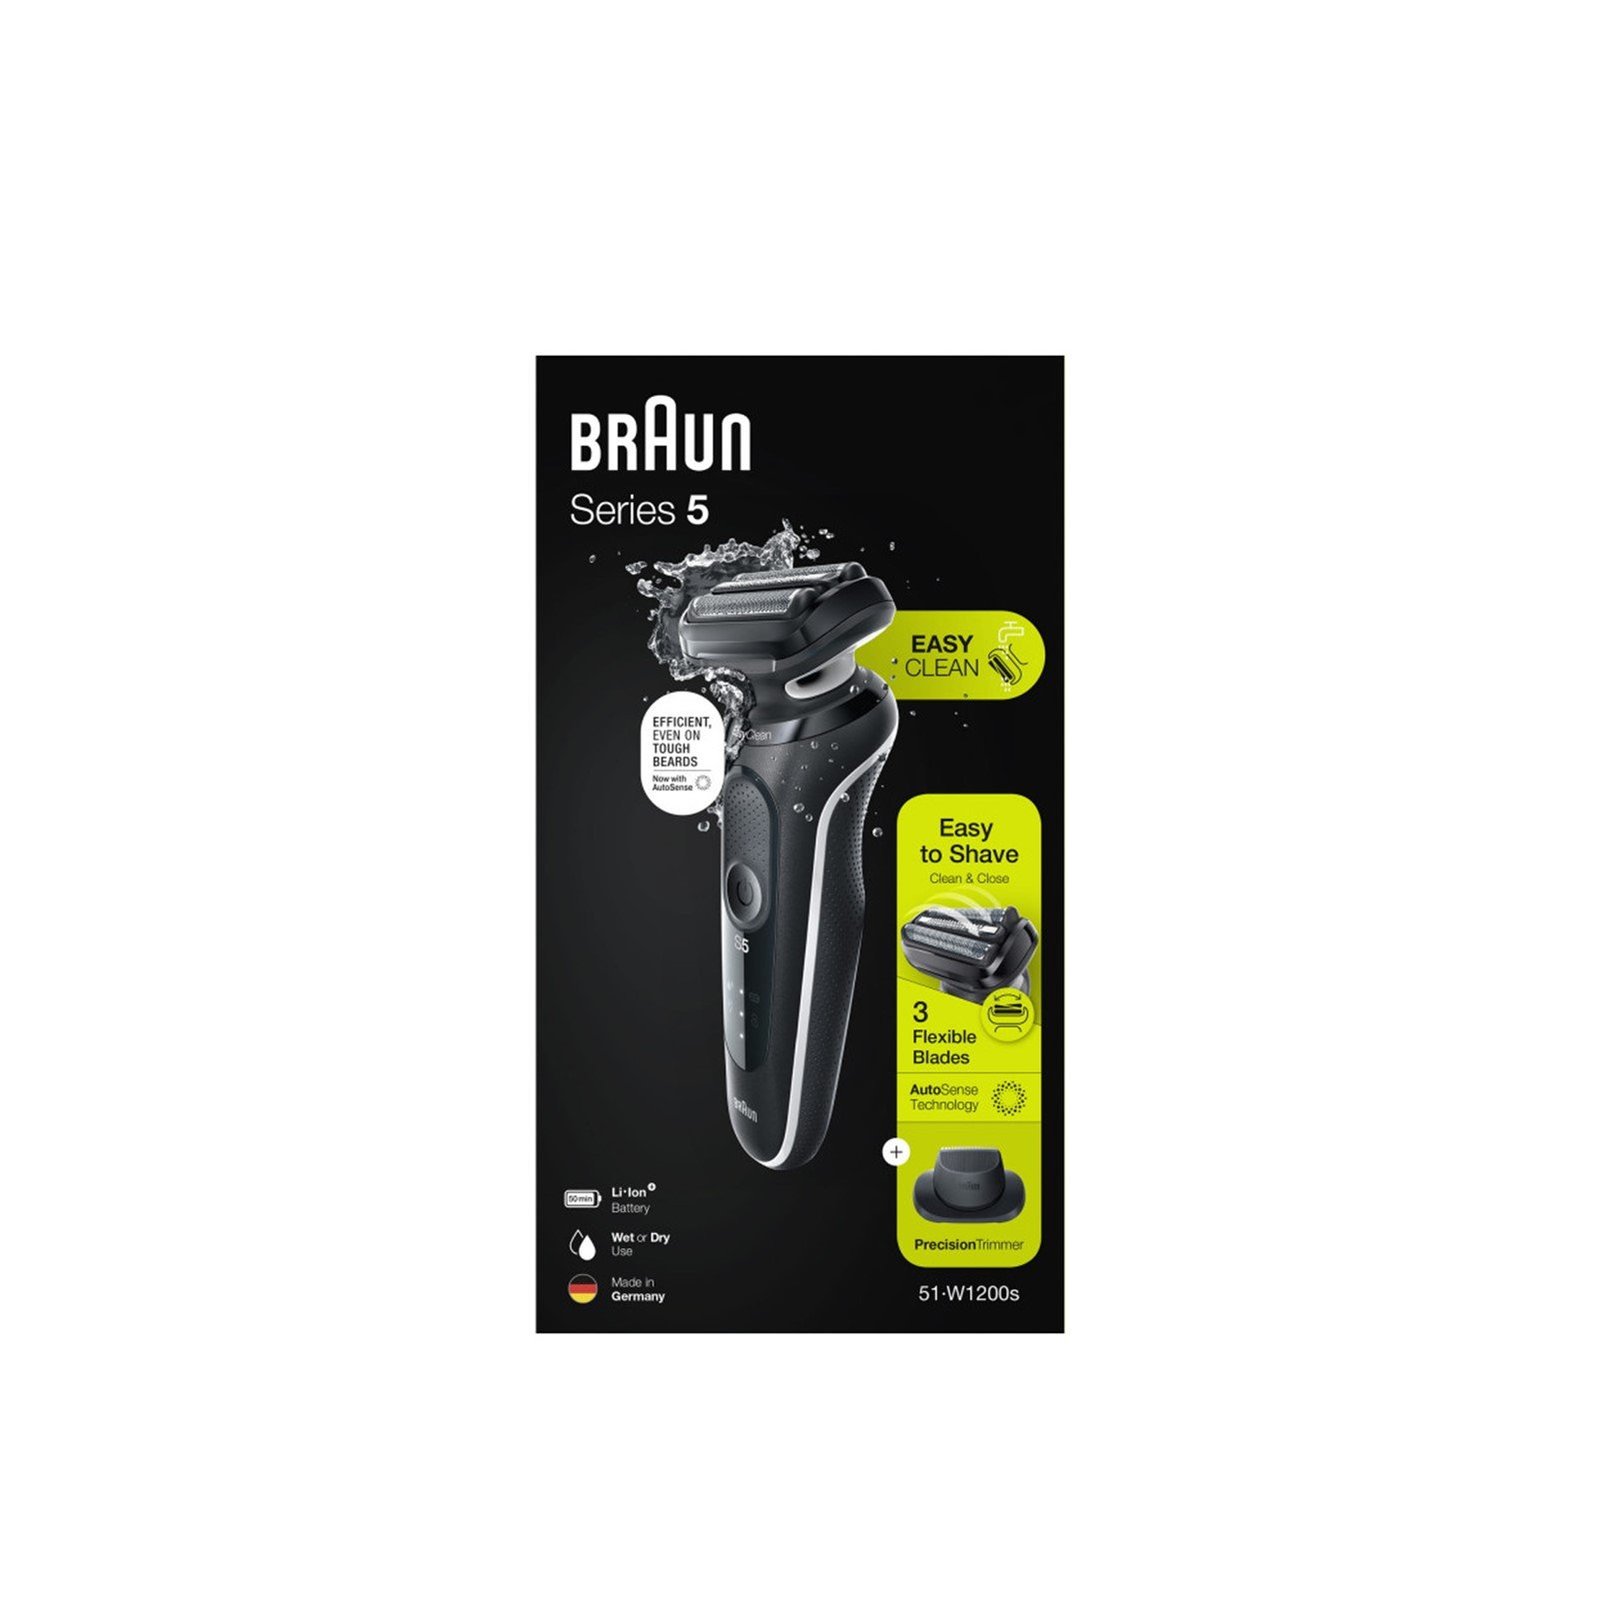 Braun Series 5 EasyClean Electric Shaver 51 W1200 S